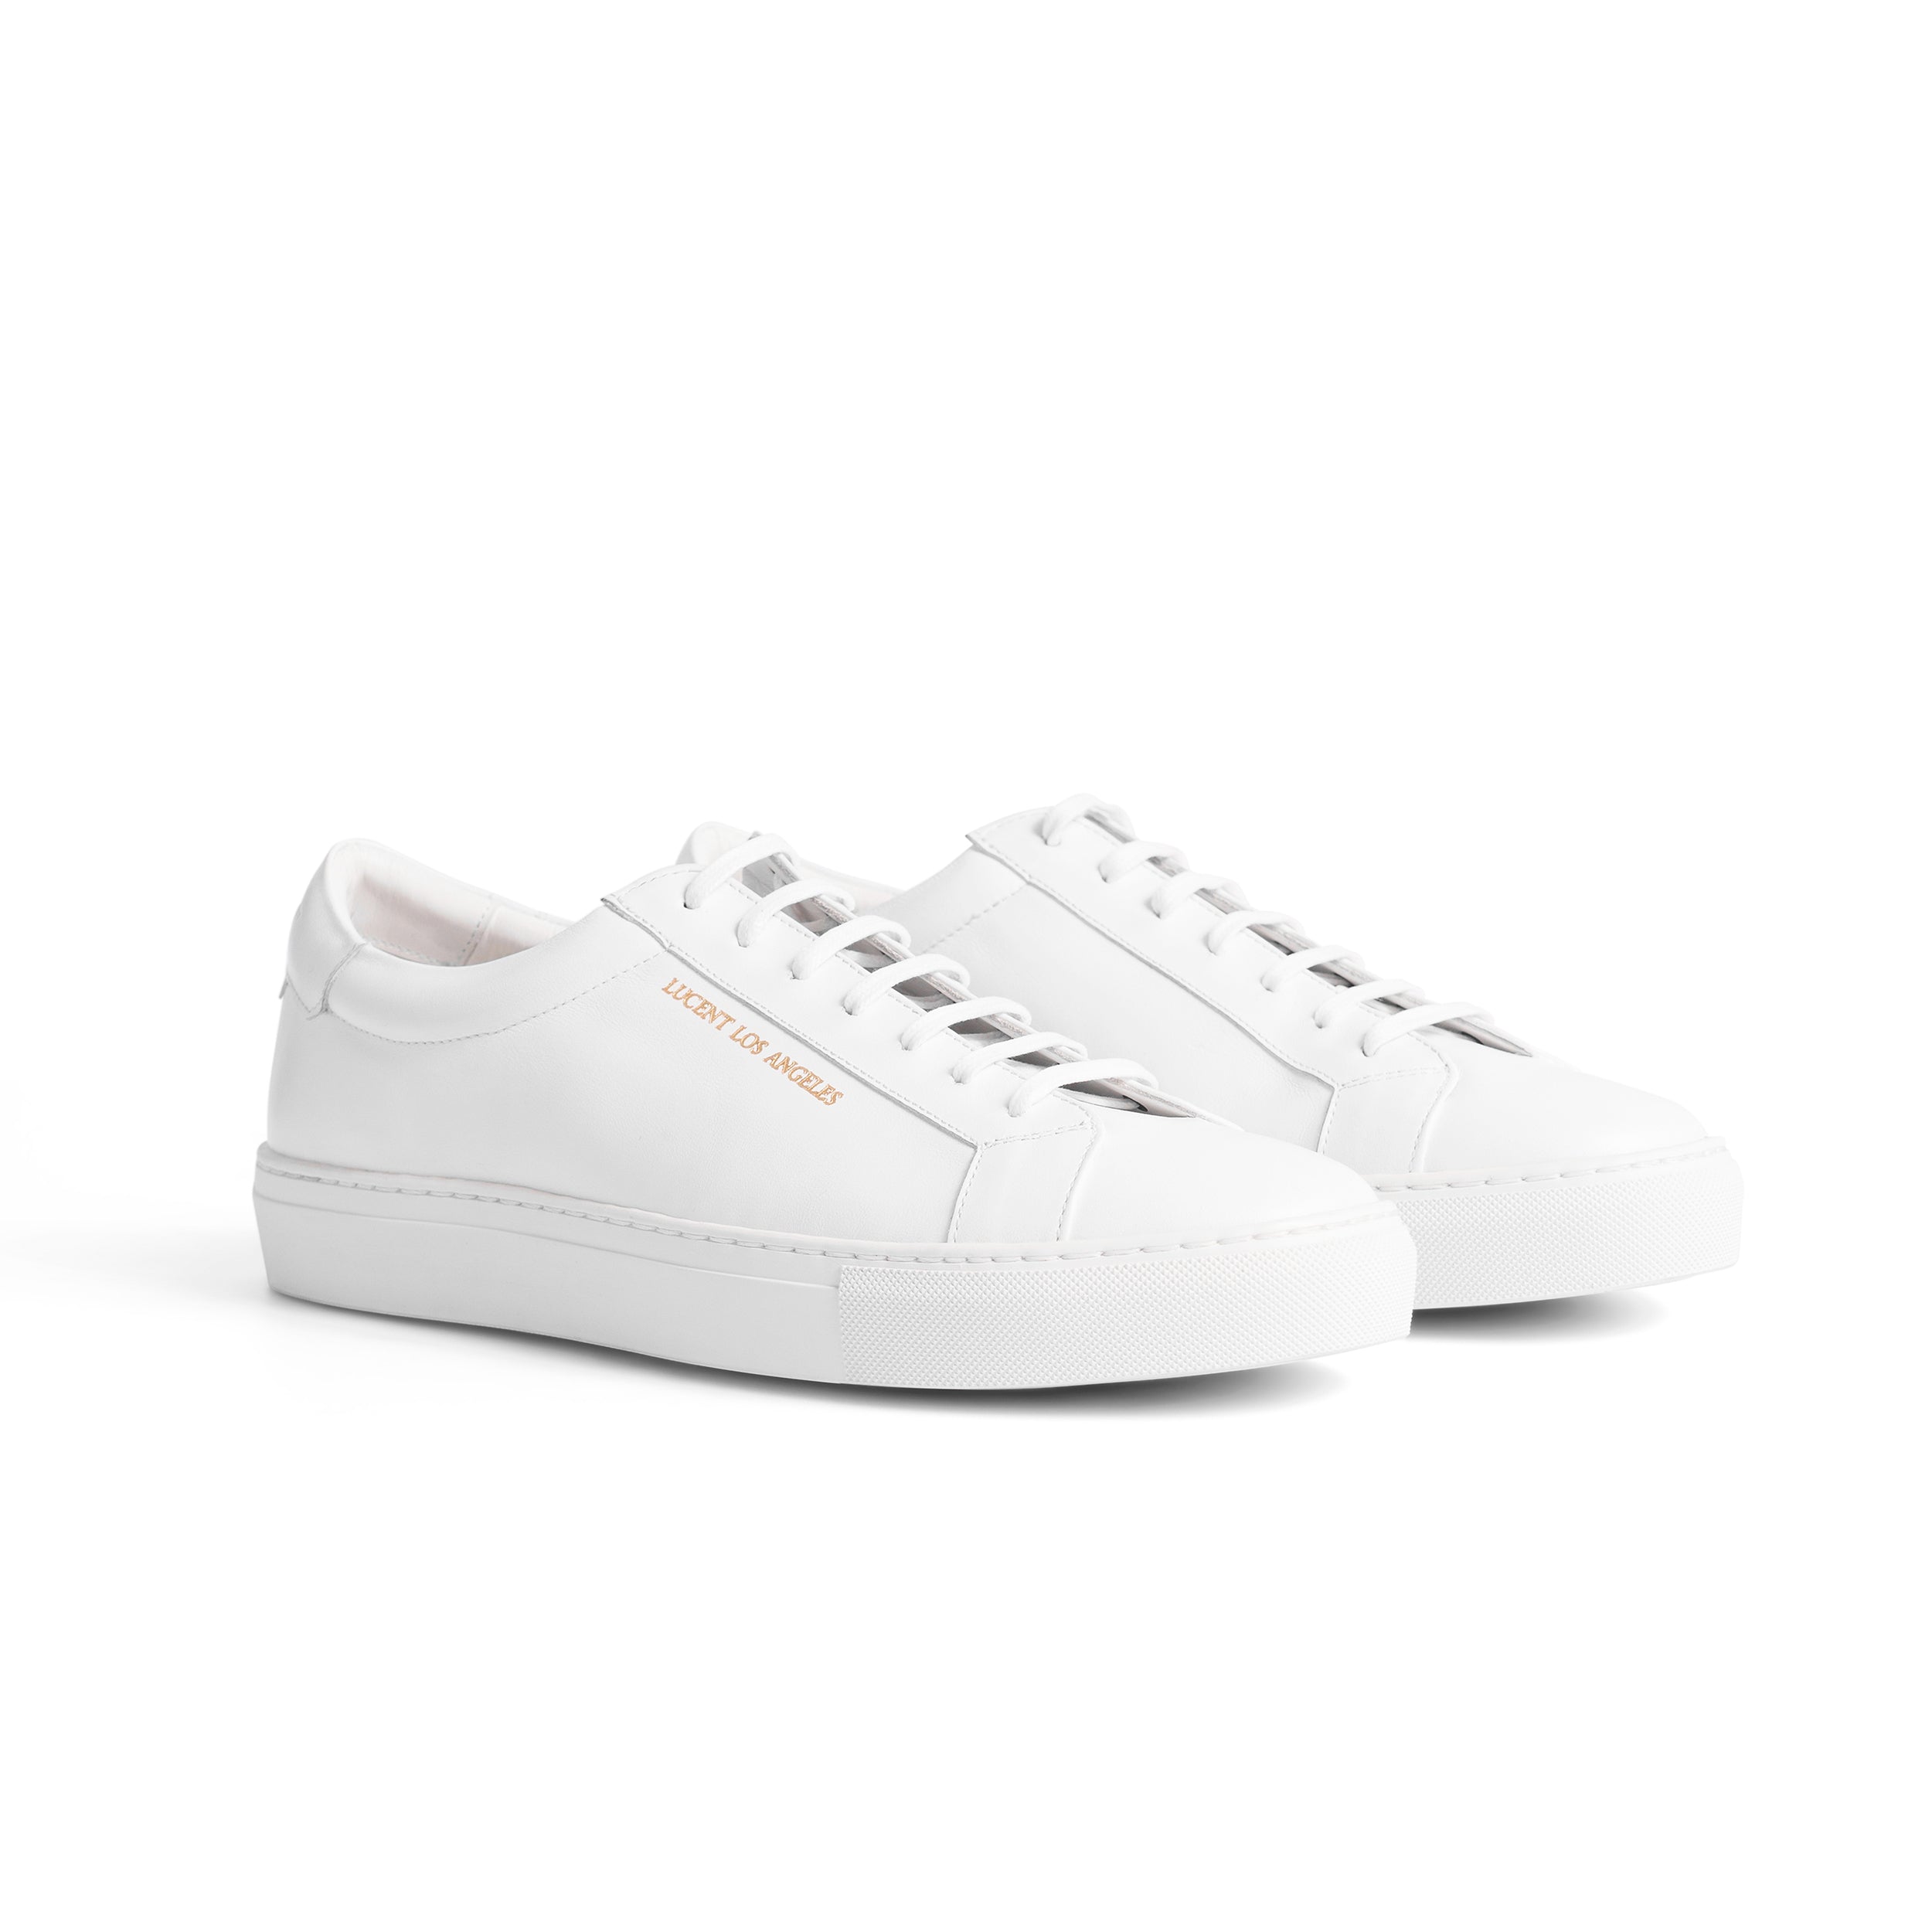 THE LUCENT SNEAKER (WHITE)